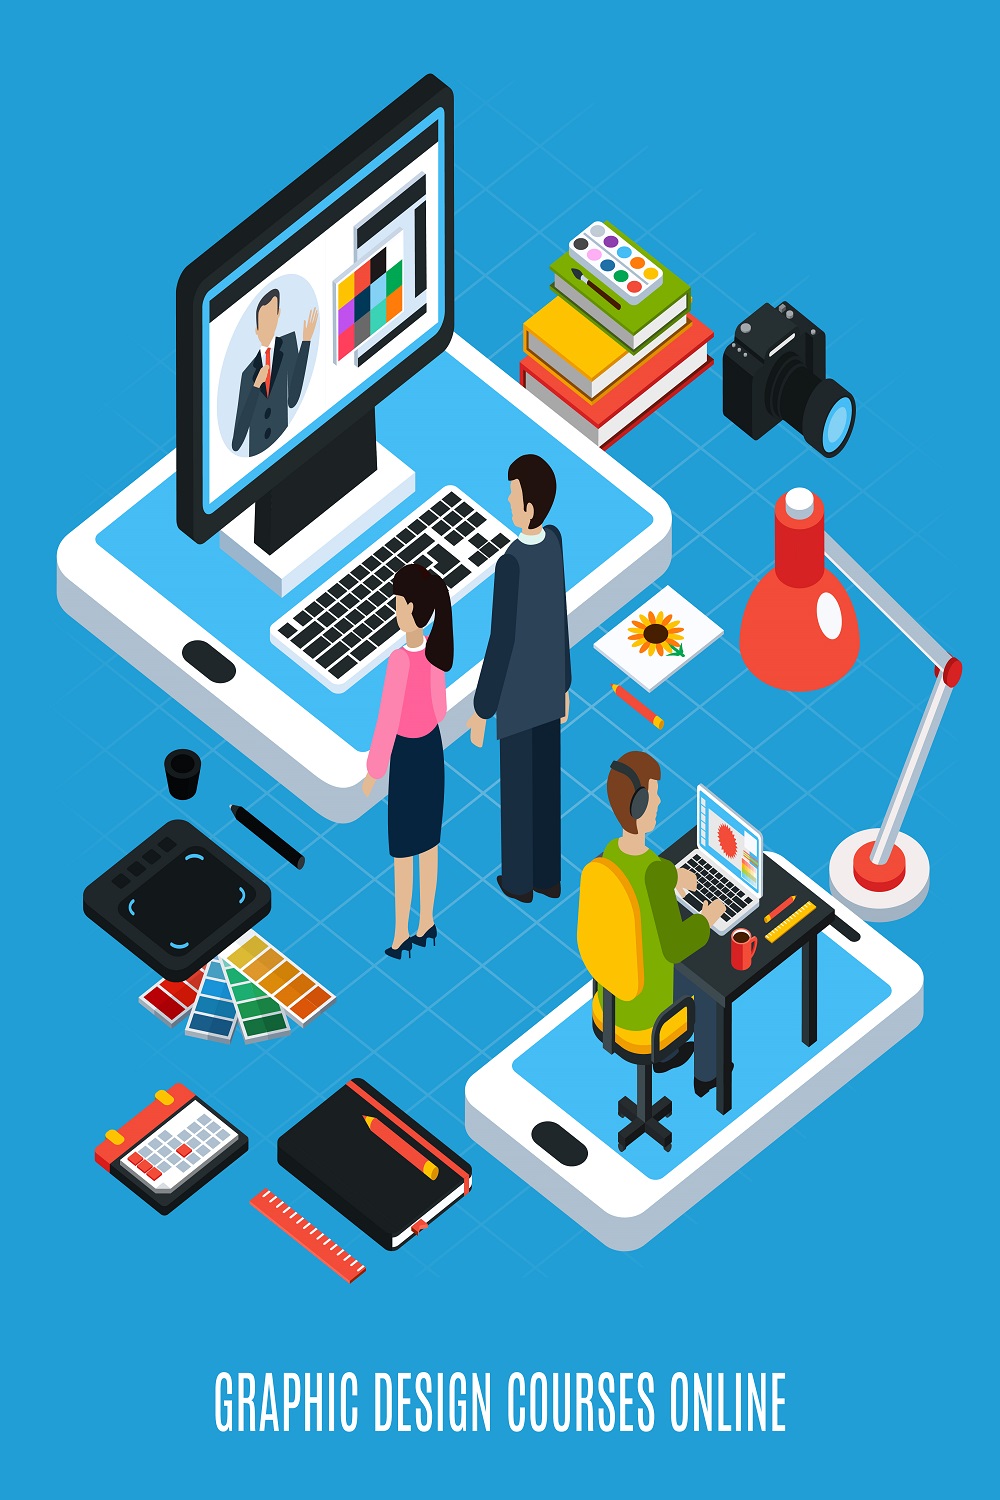 Online graphic design courses isometric concept with students computer tablet swatches pinterest preview image.